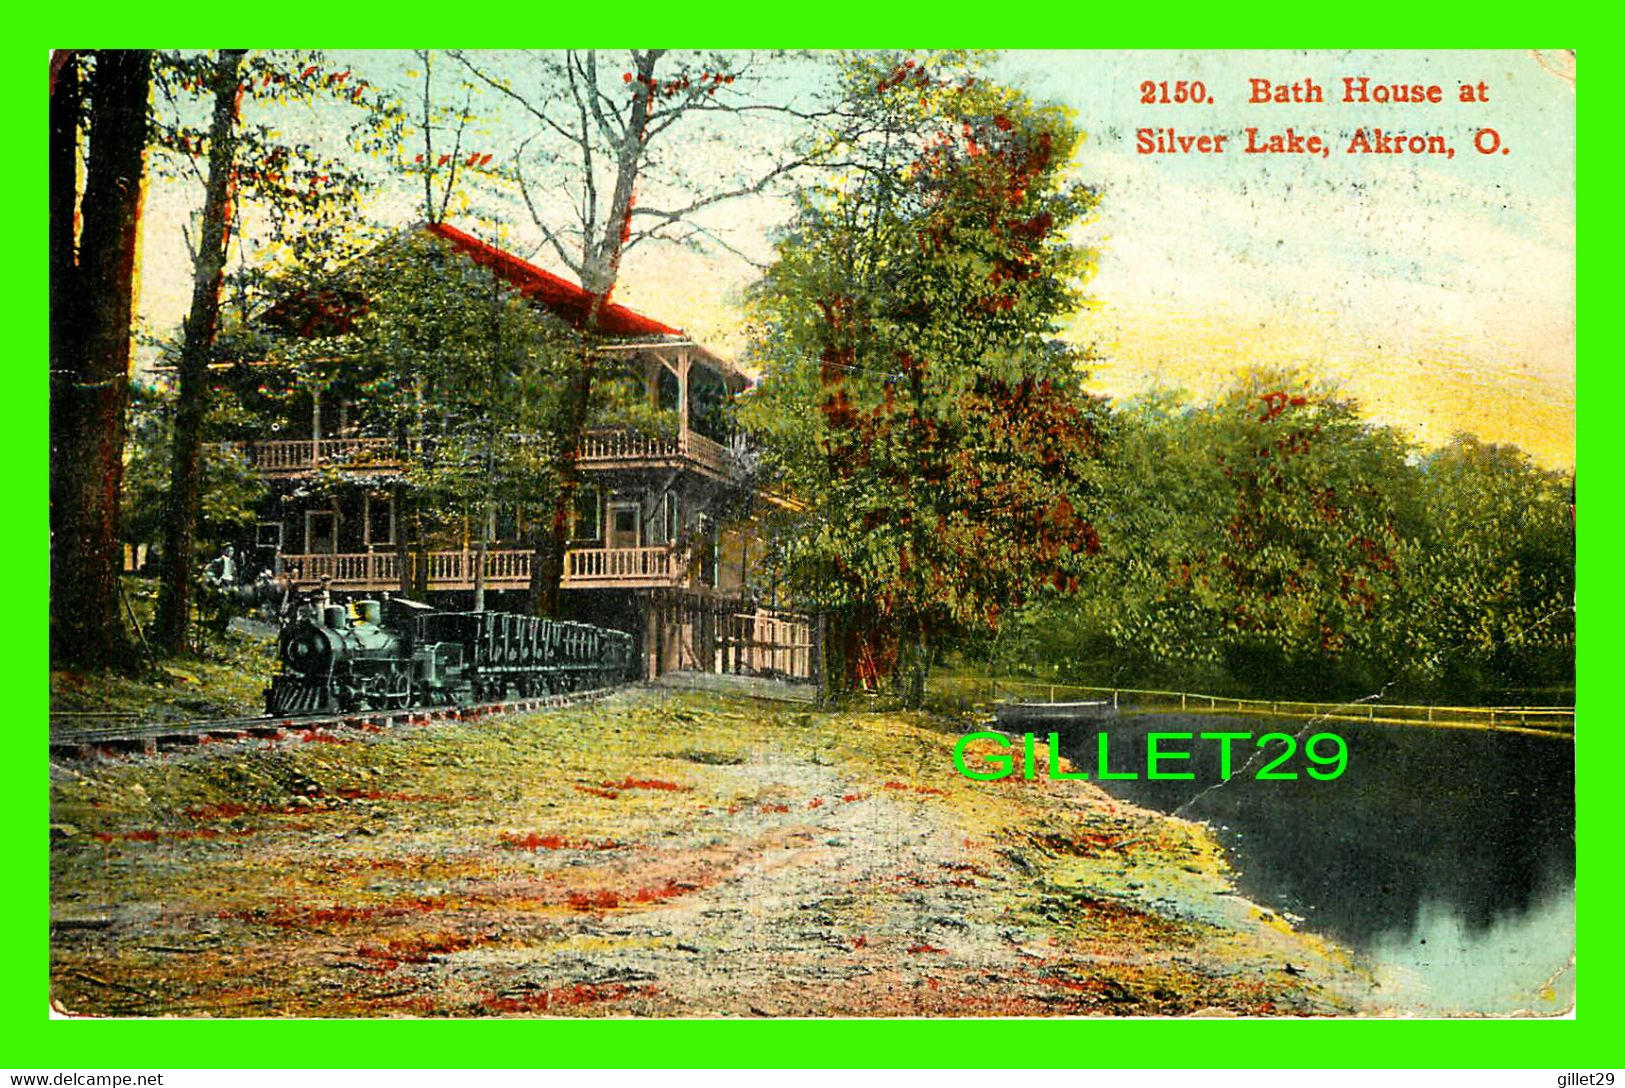 AKRON, OH - BATH HOUSE AT SILVER LAKE - ANIMATED WITH TRAINS - TRAVEL IN 1918 -  S. H. KNOX & CO - - Akron